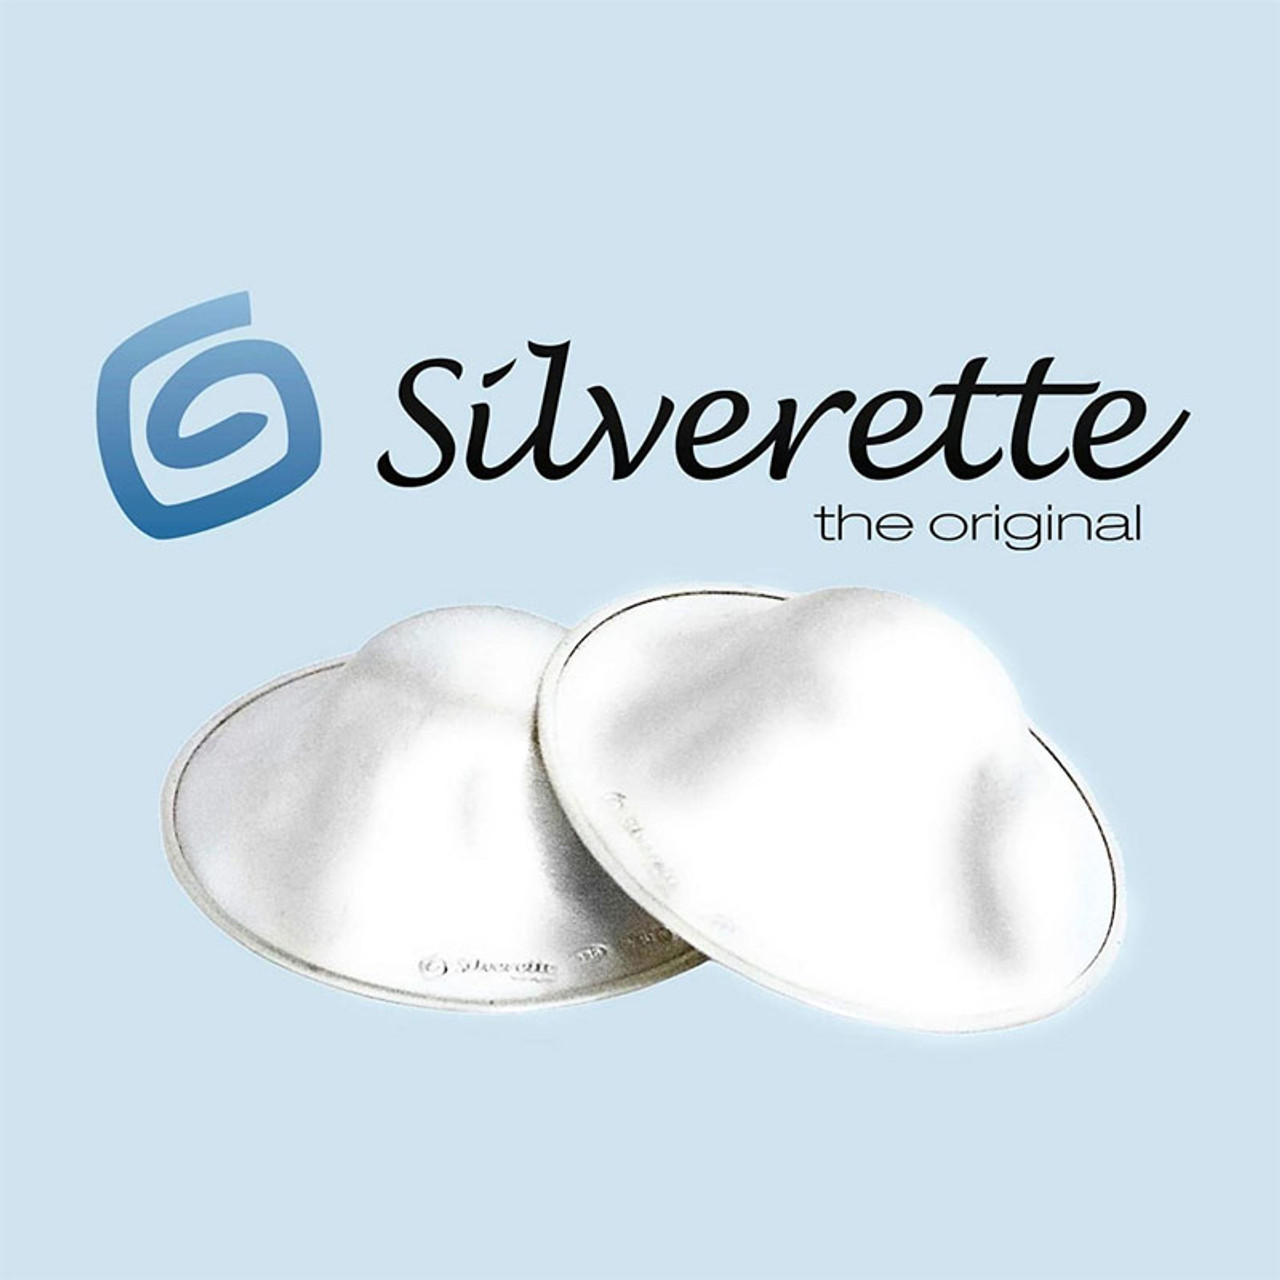 Silverette Nursing Cups : Also Know as Breast Angels Silver